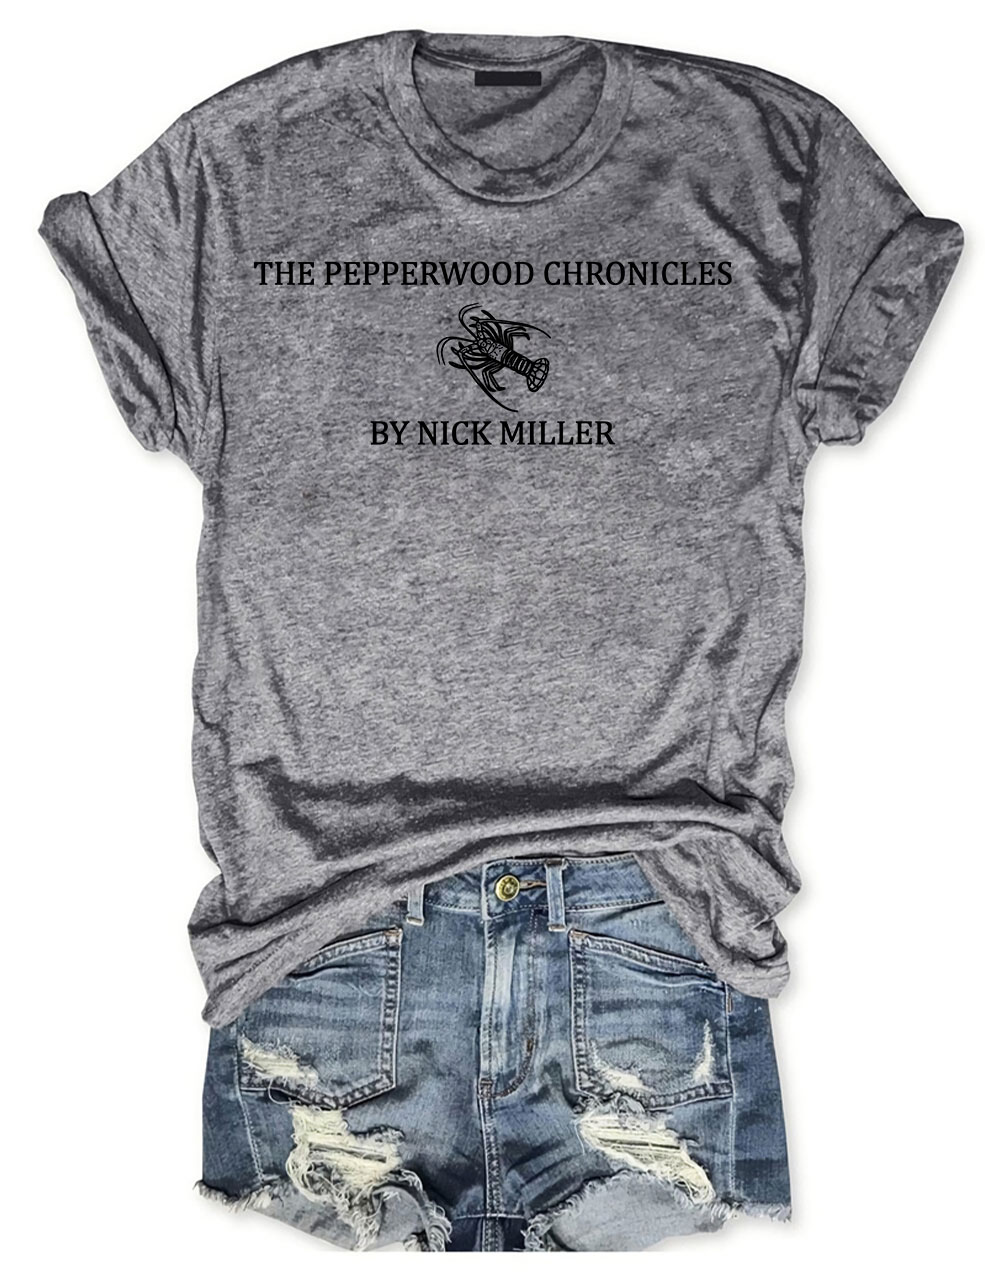 The Pepperwood Chronicles T-shirt 